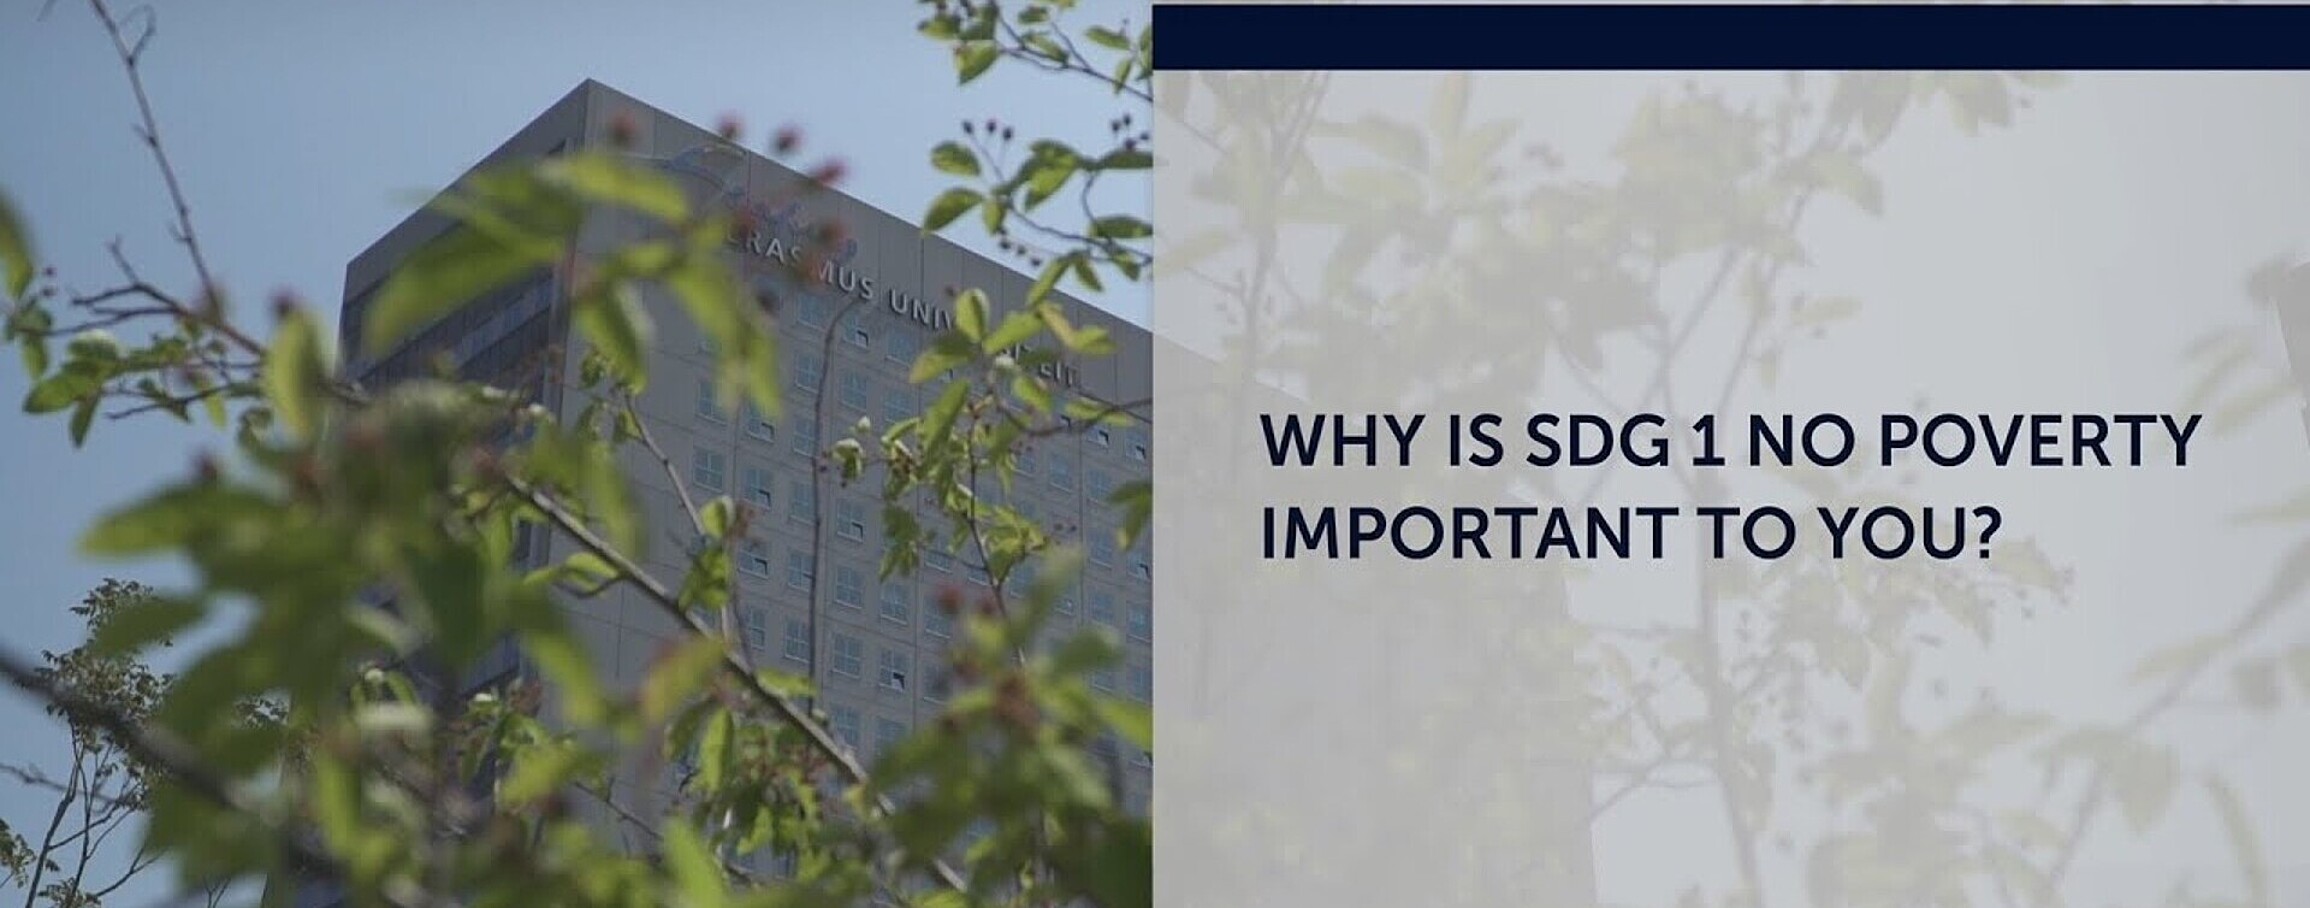 Why is SDG 1 important to you?  